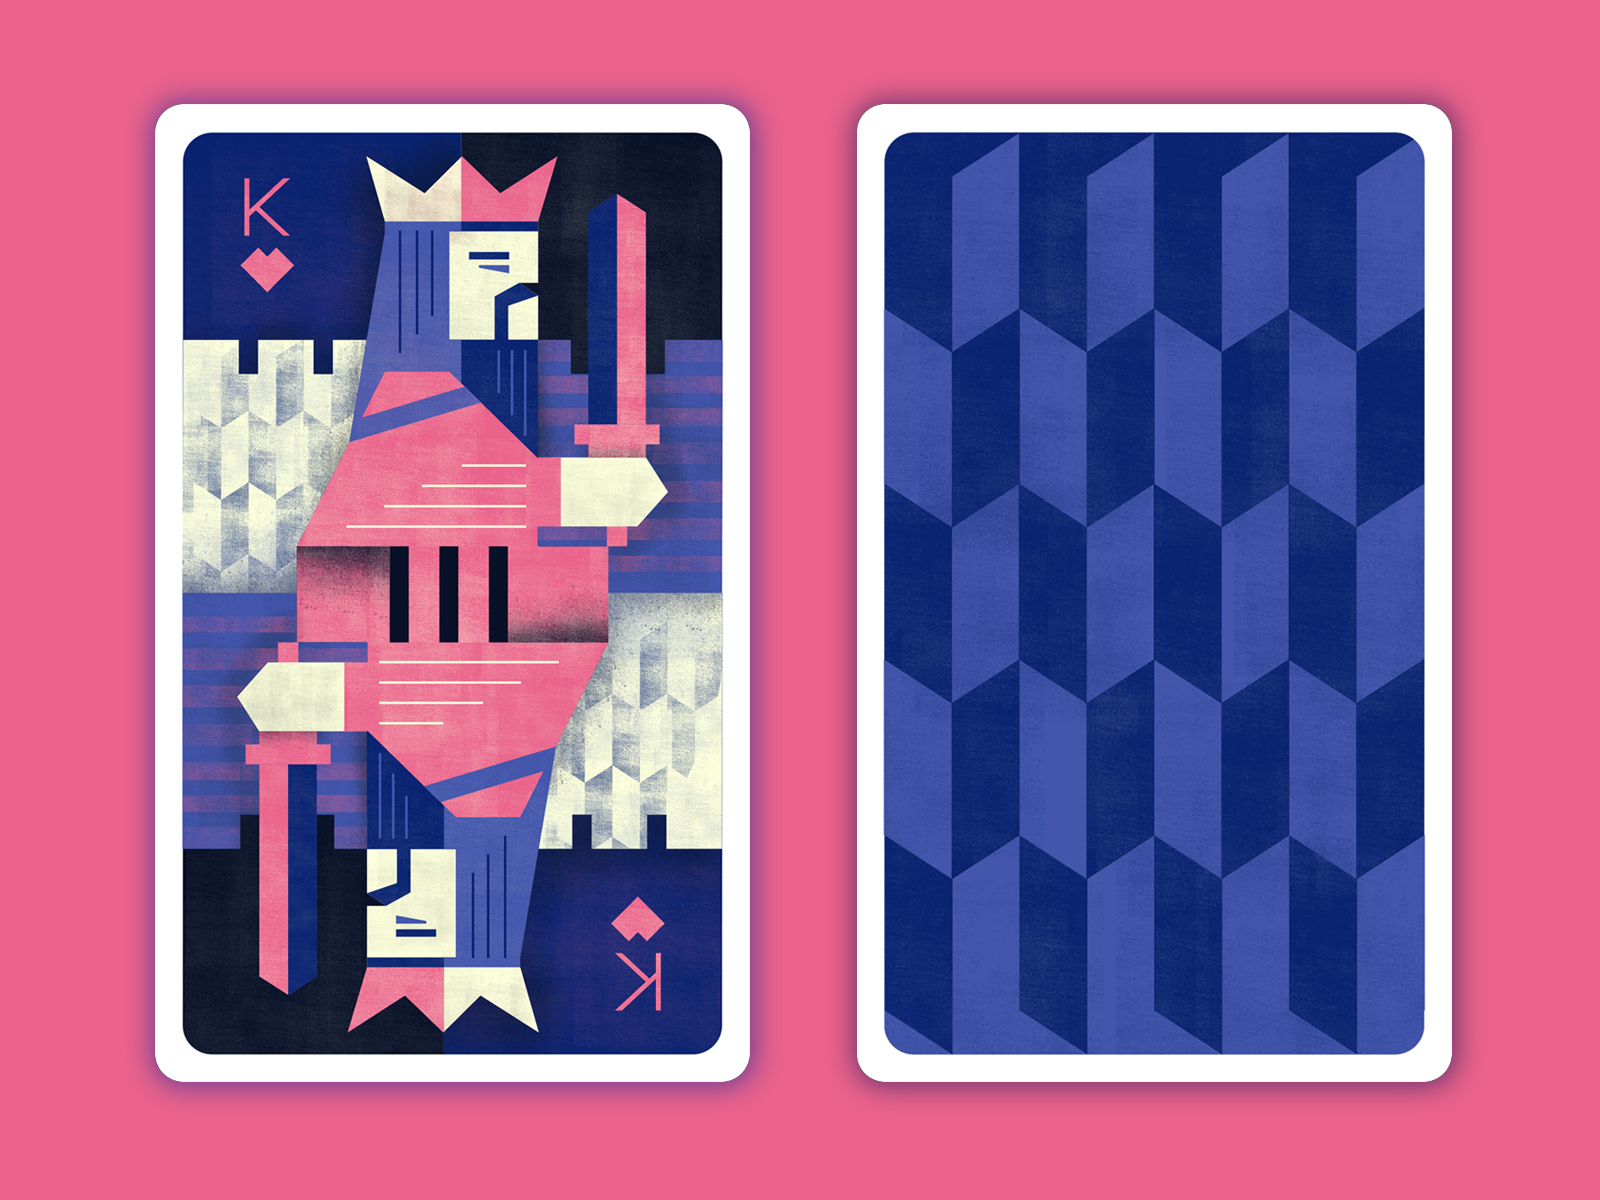 Playing cards. Weekly warm up